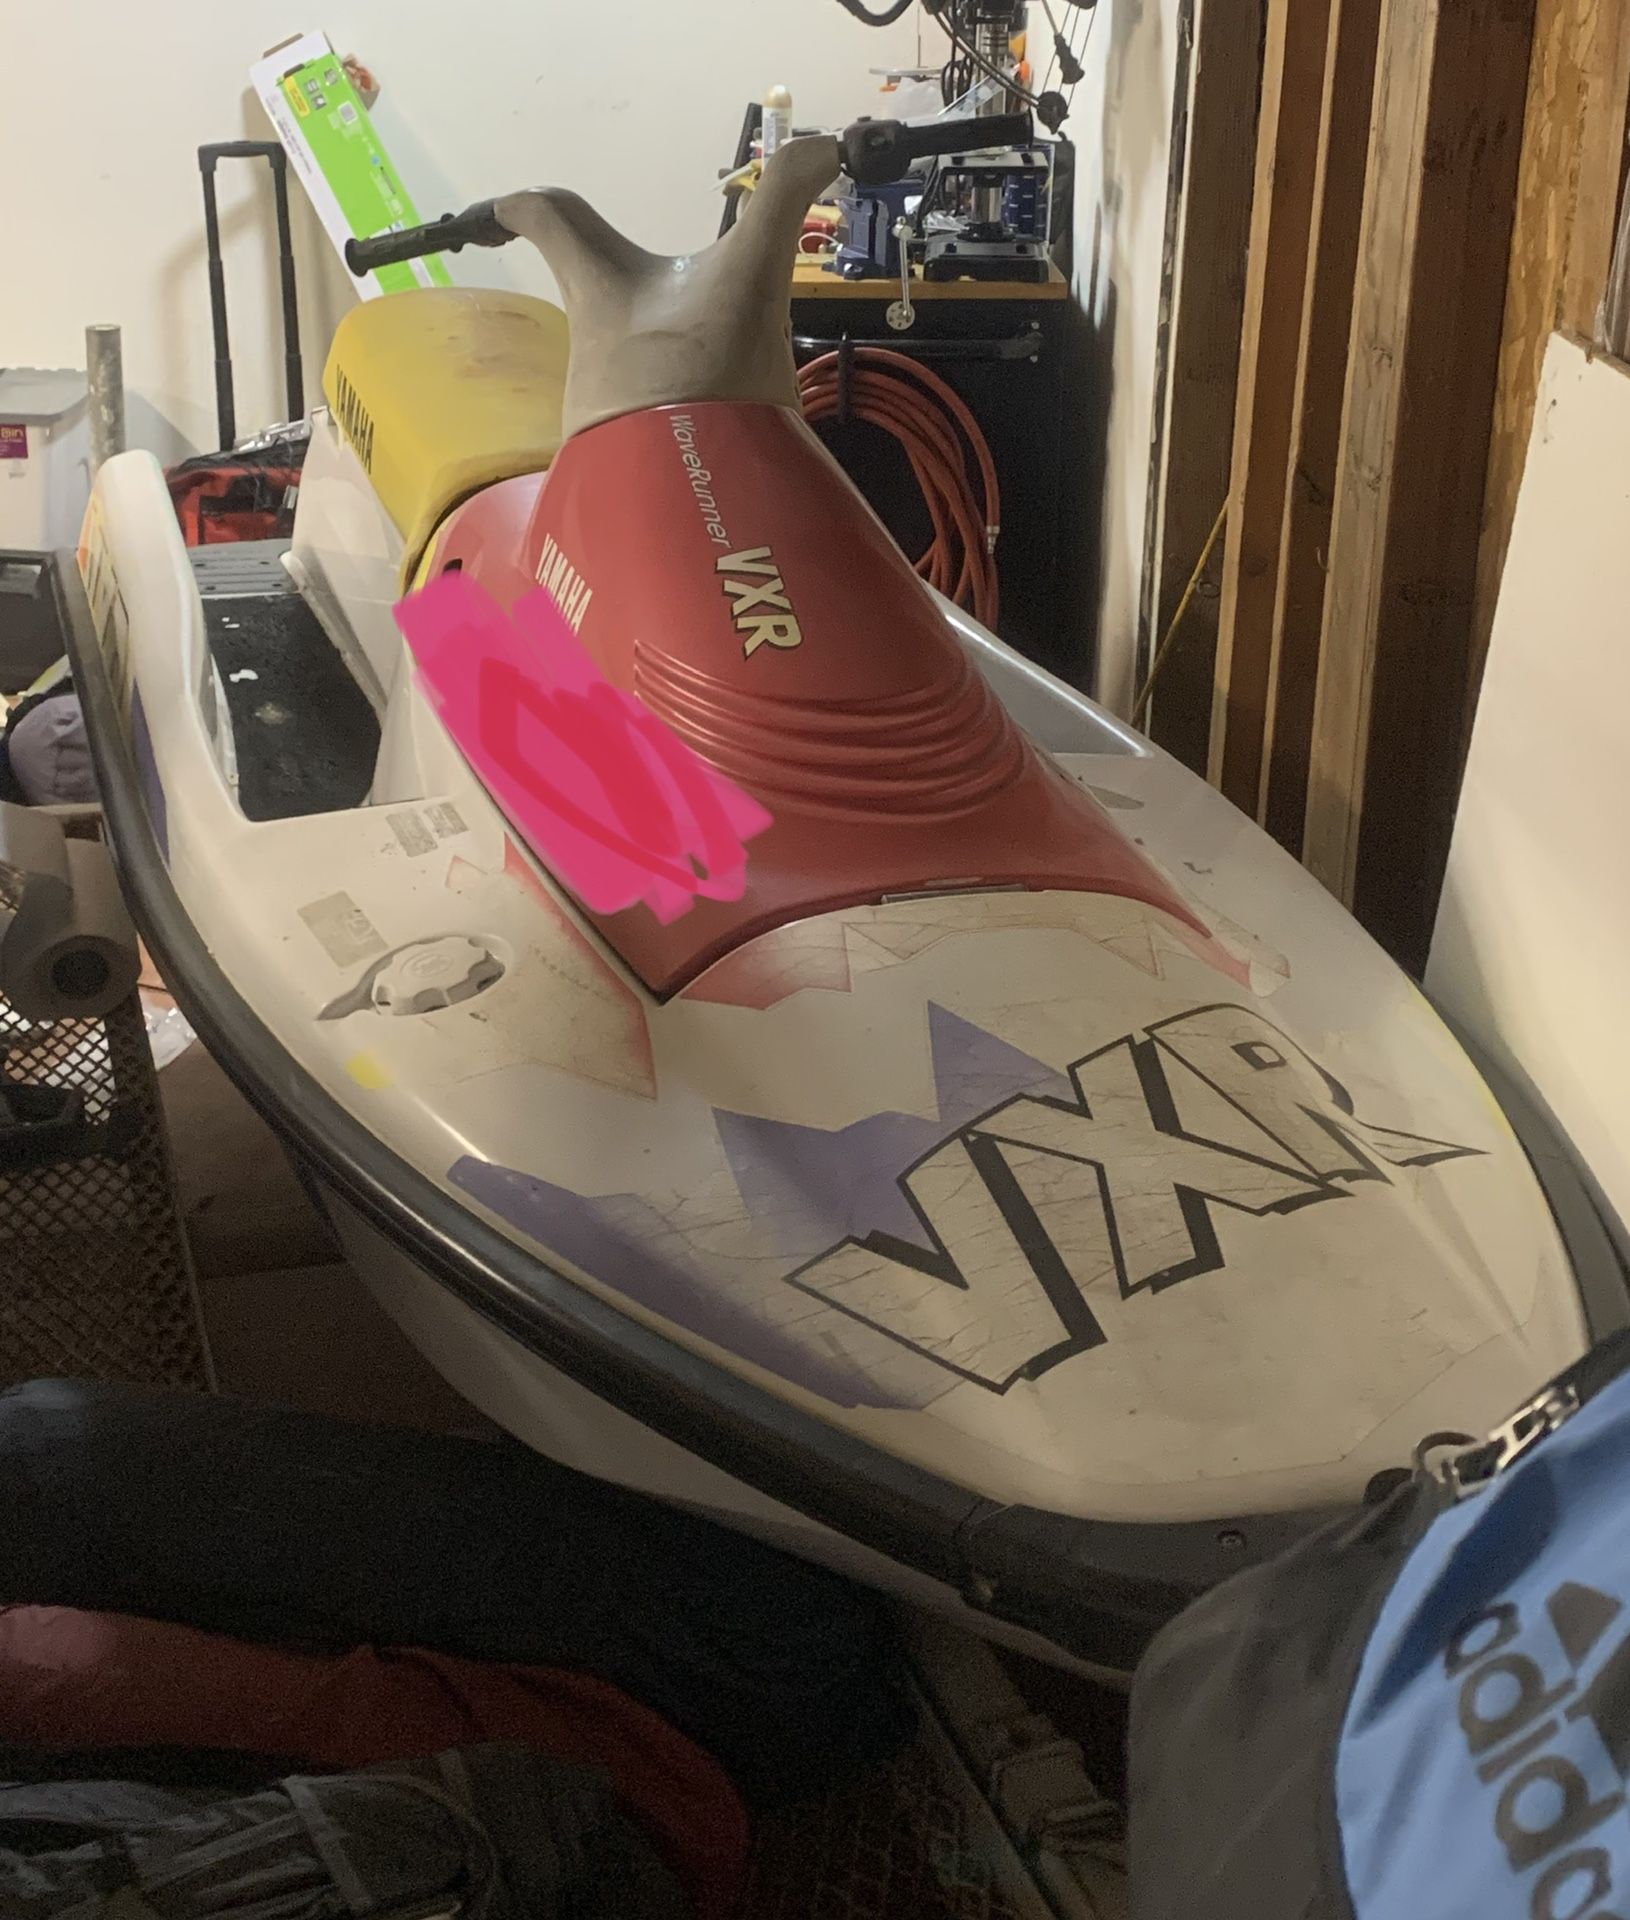 1993 Yamaha Waverunner with double ski trailer. Jackets and manuals included.